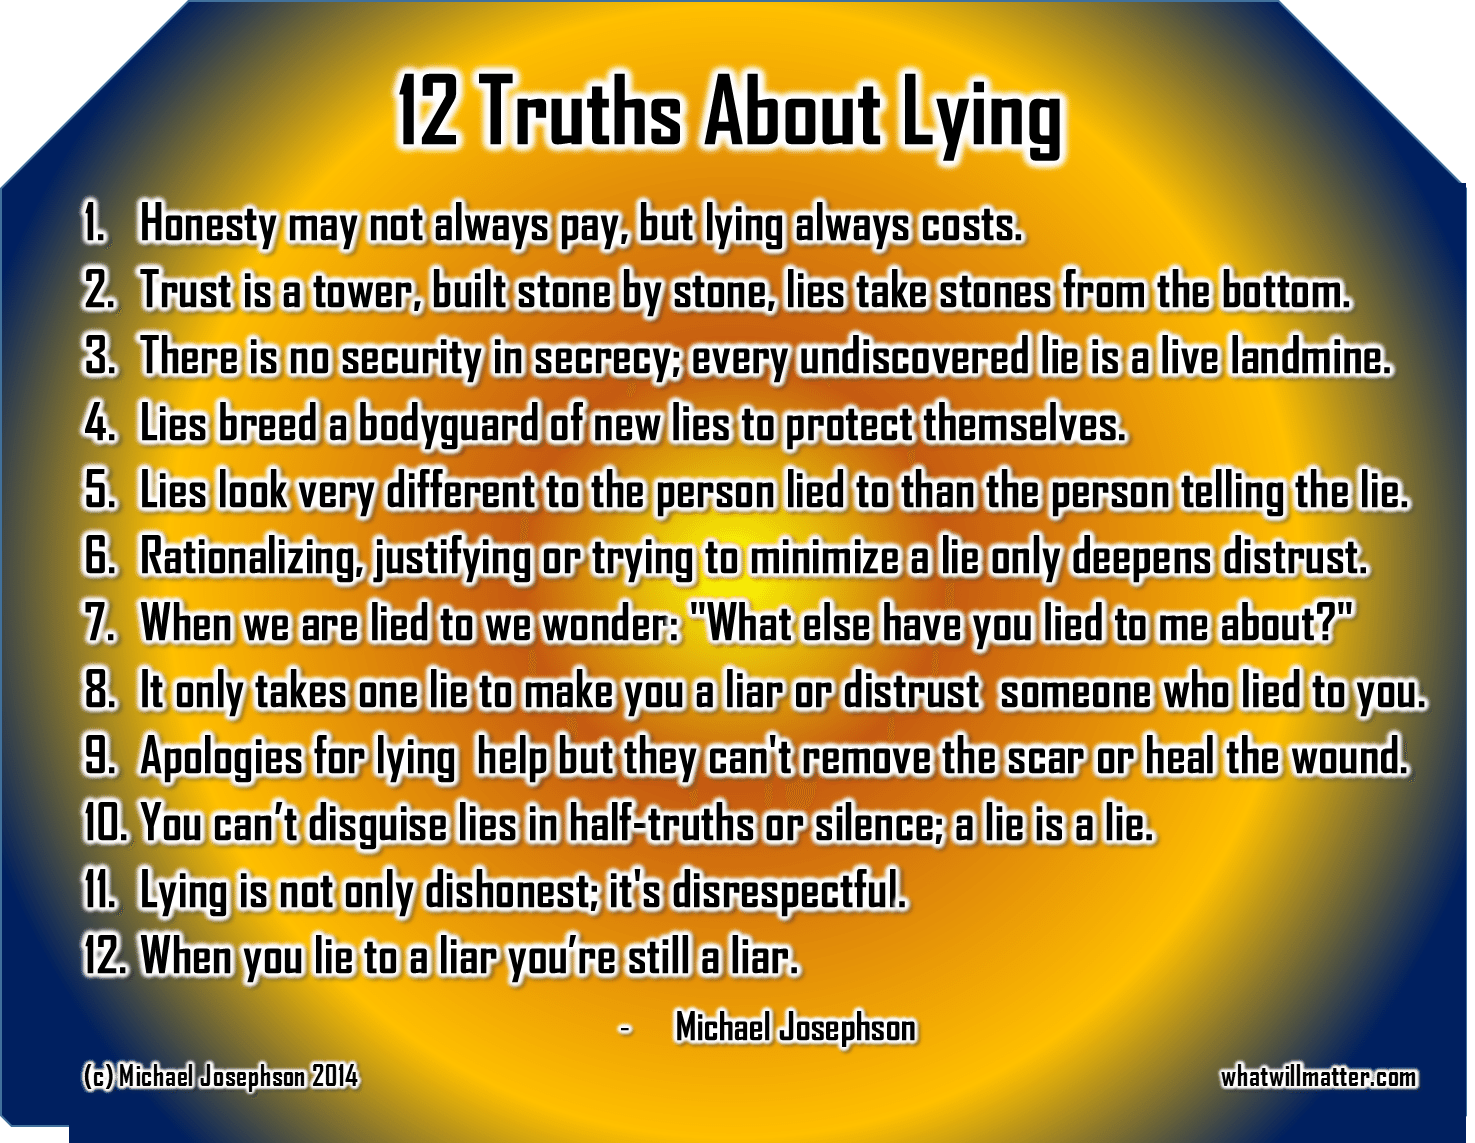 12 TRUTHS ABOUT LYING | What Will Matter